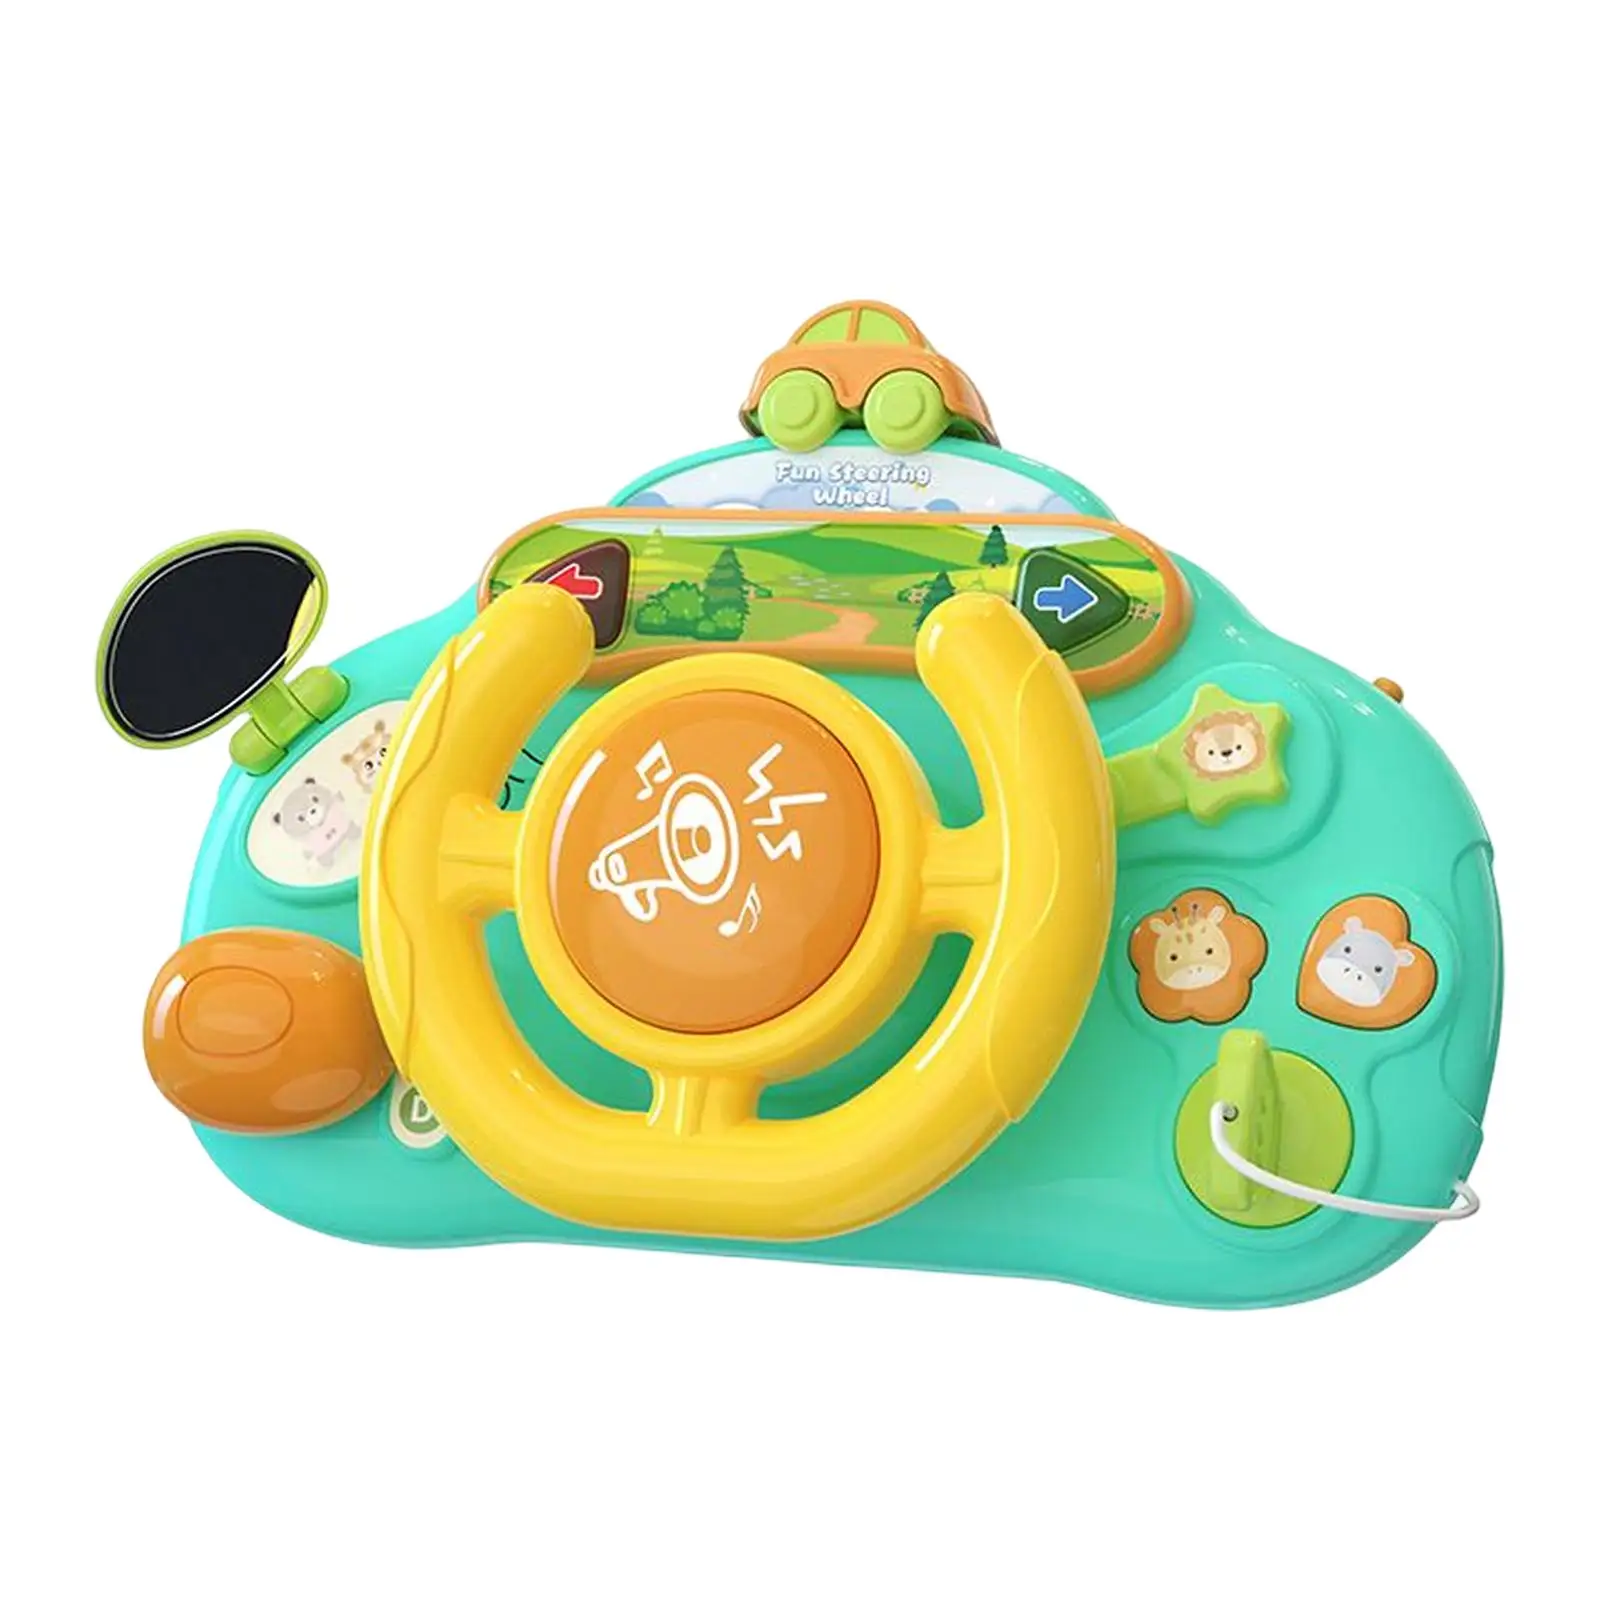 Simulation Steering Wheel Car Seat Toy Educational for Interaction Role Play